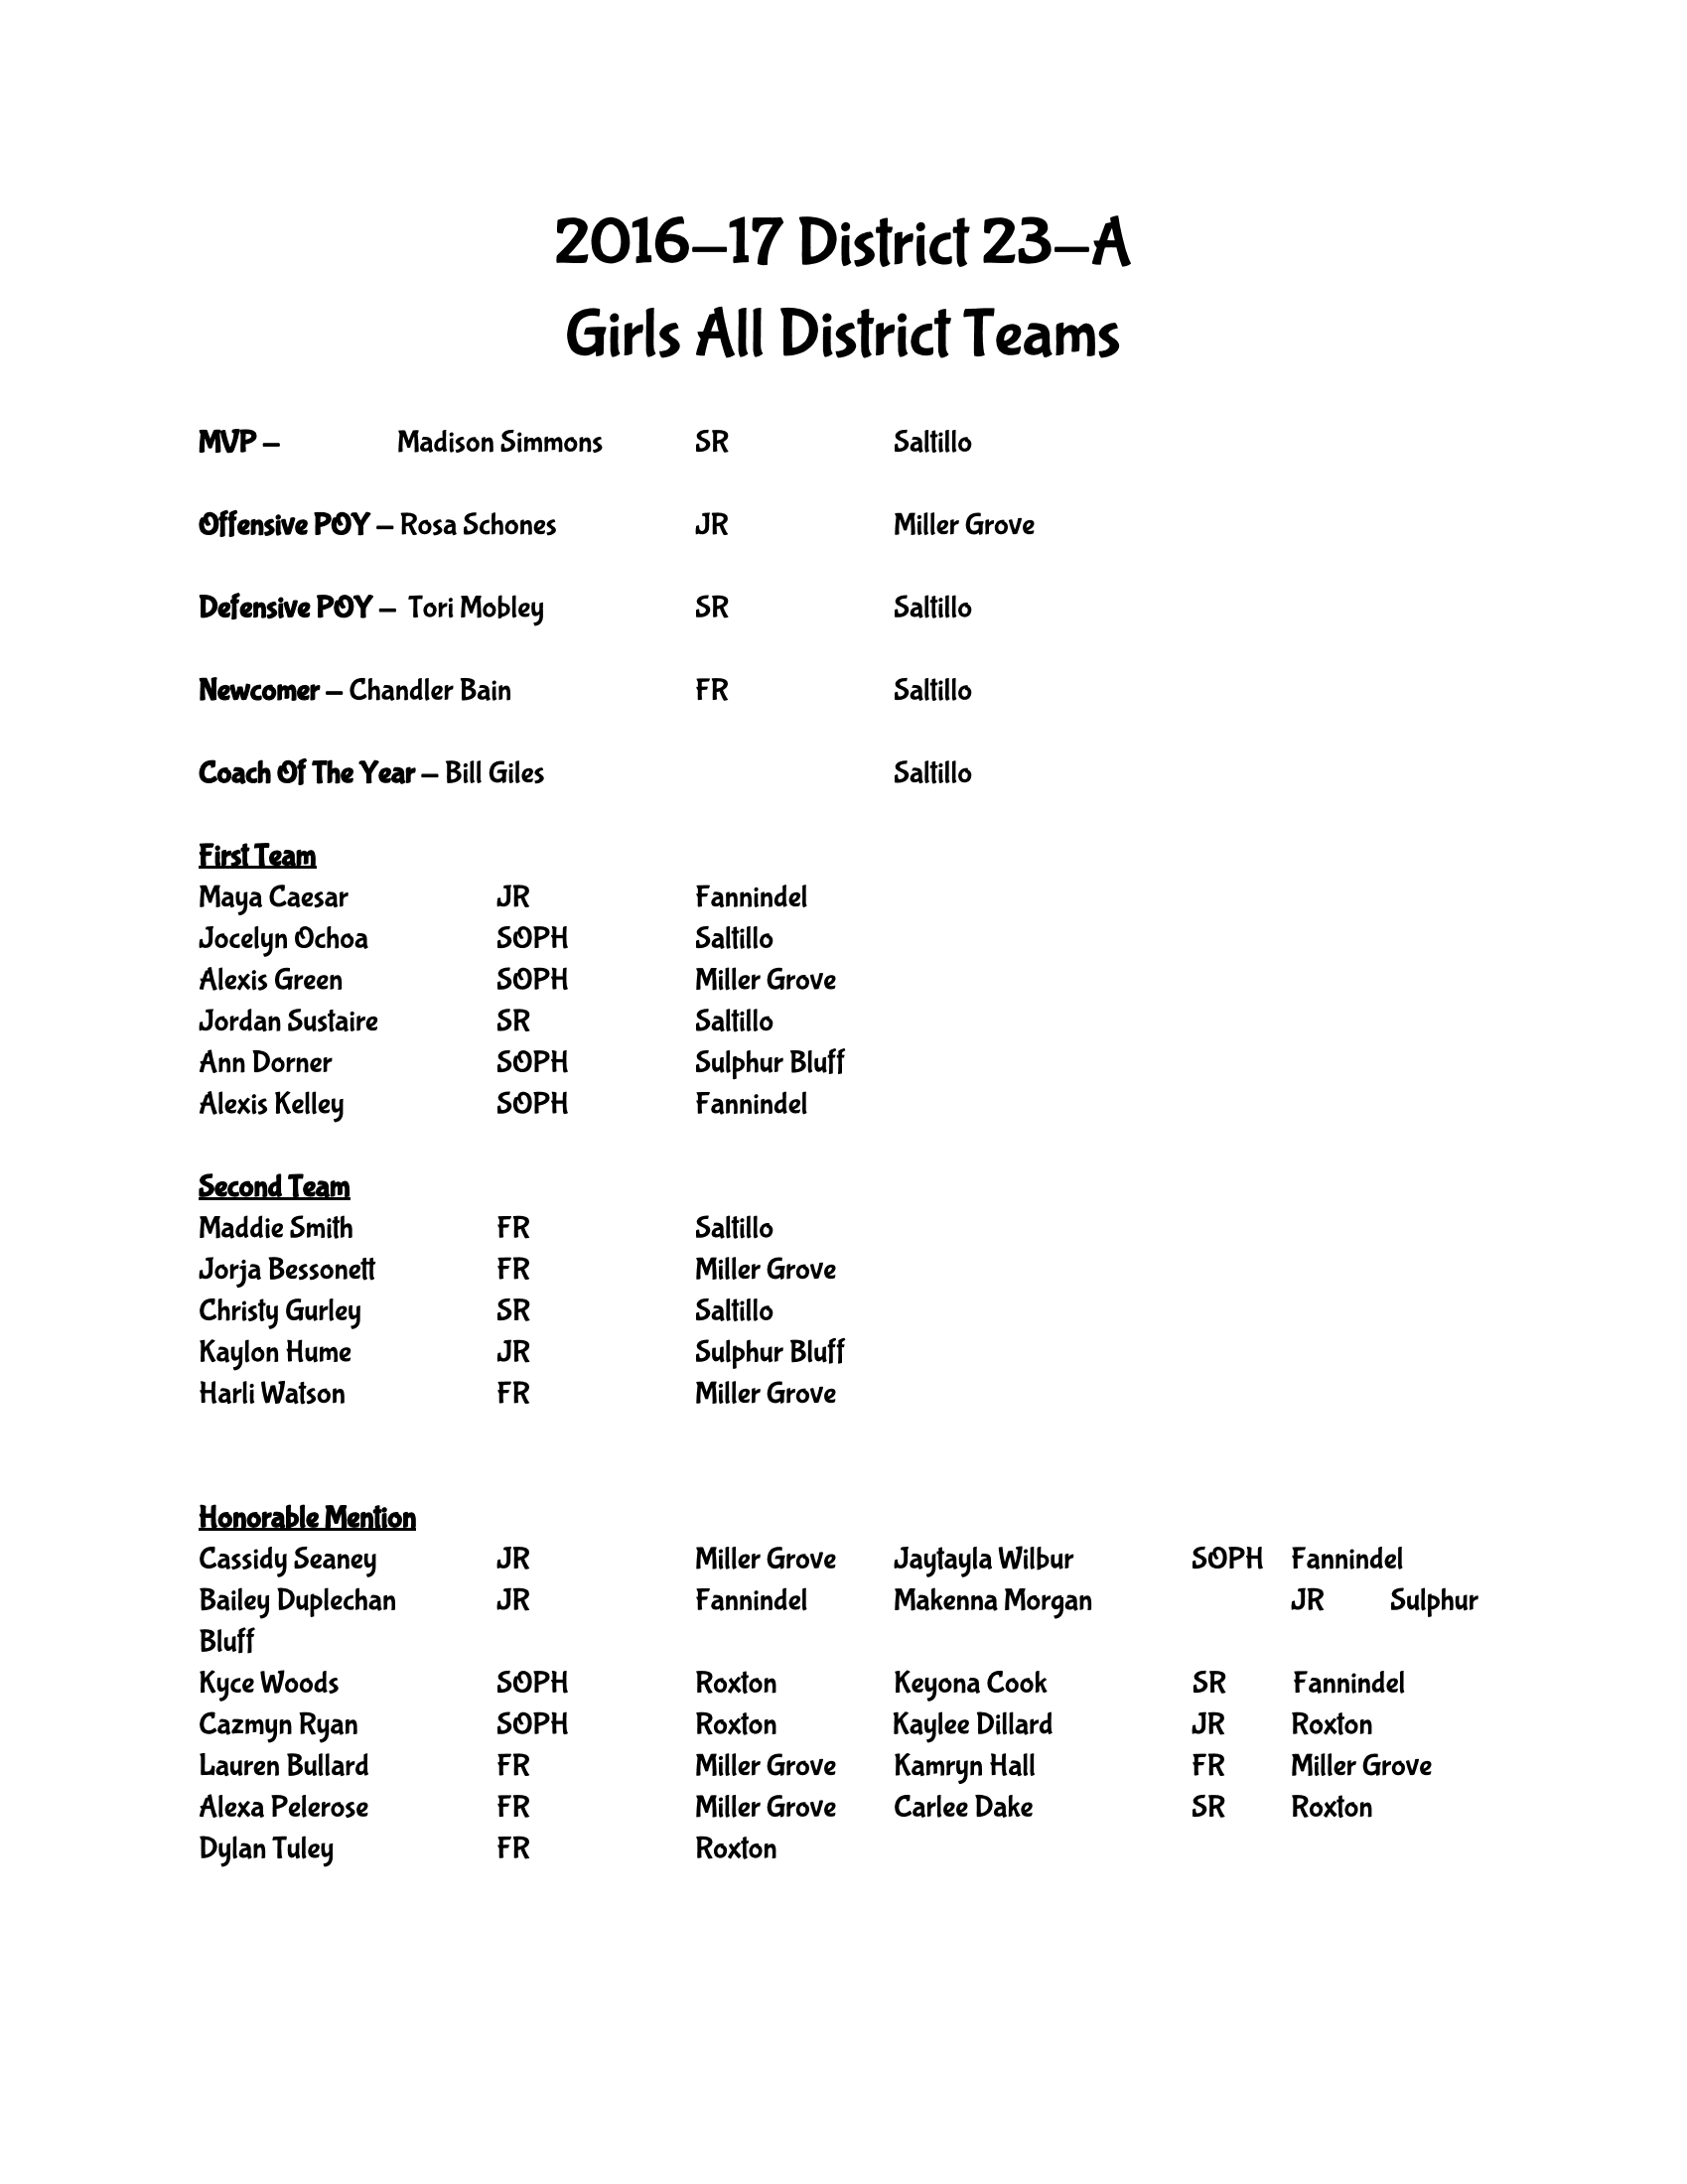 Saltillo, Sulphur Bluff, and Miller Grove Athletes Chosen for 2017-18 Girls Basketball District 23-A All District Selections